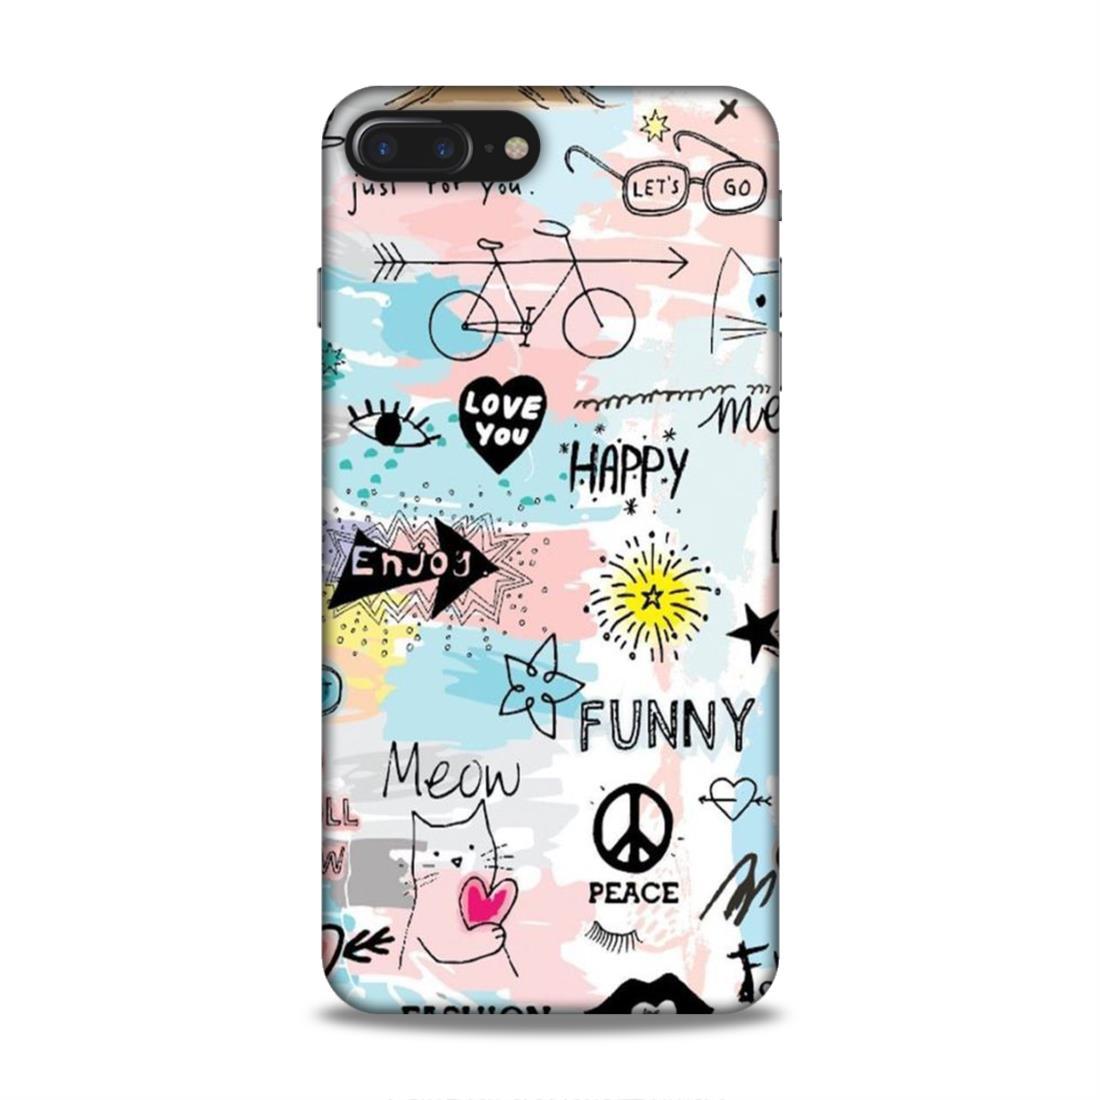 Cute Funky Happy iPhone 8 Plus Mobile Cover Case